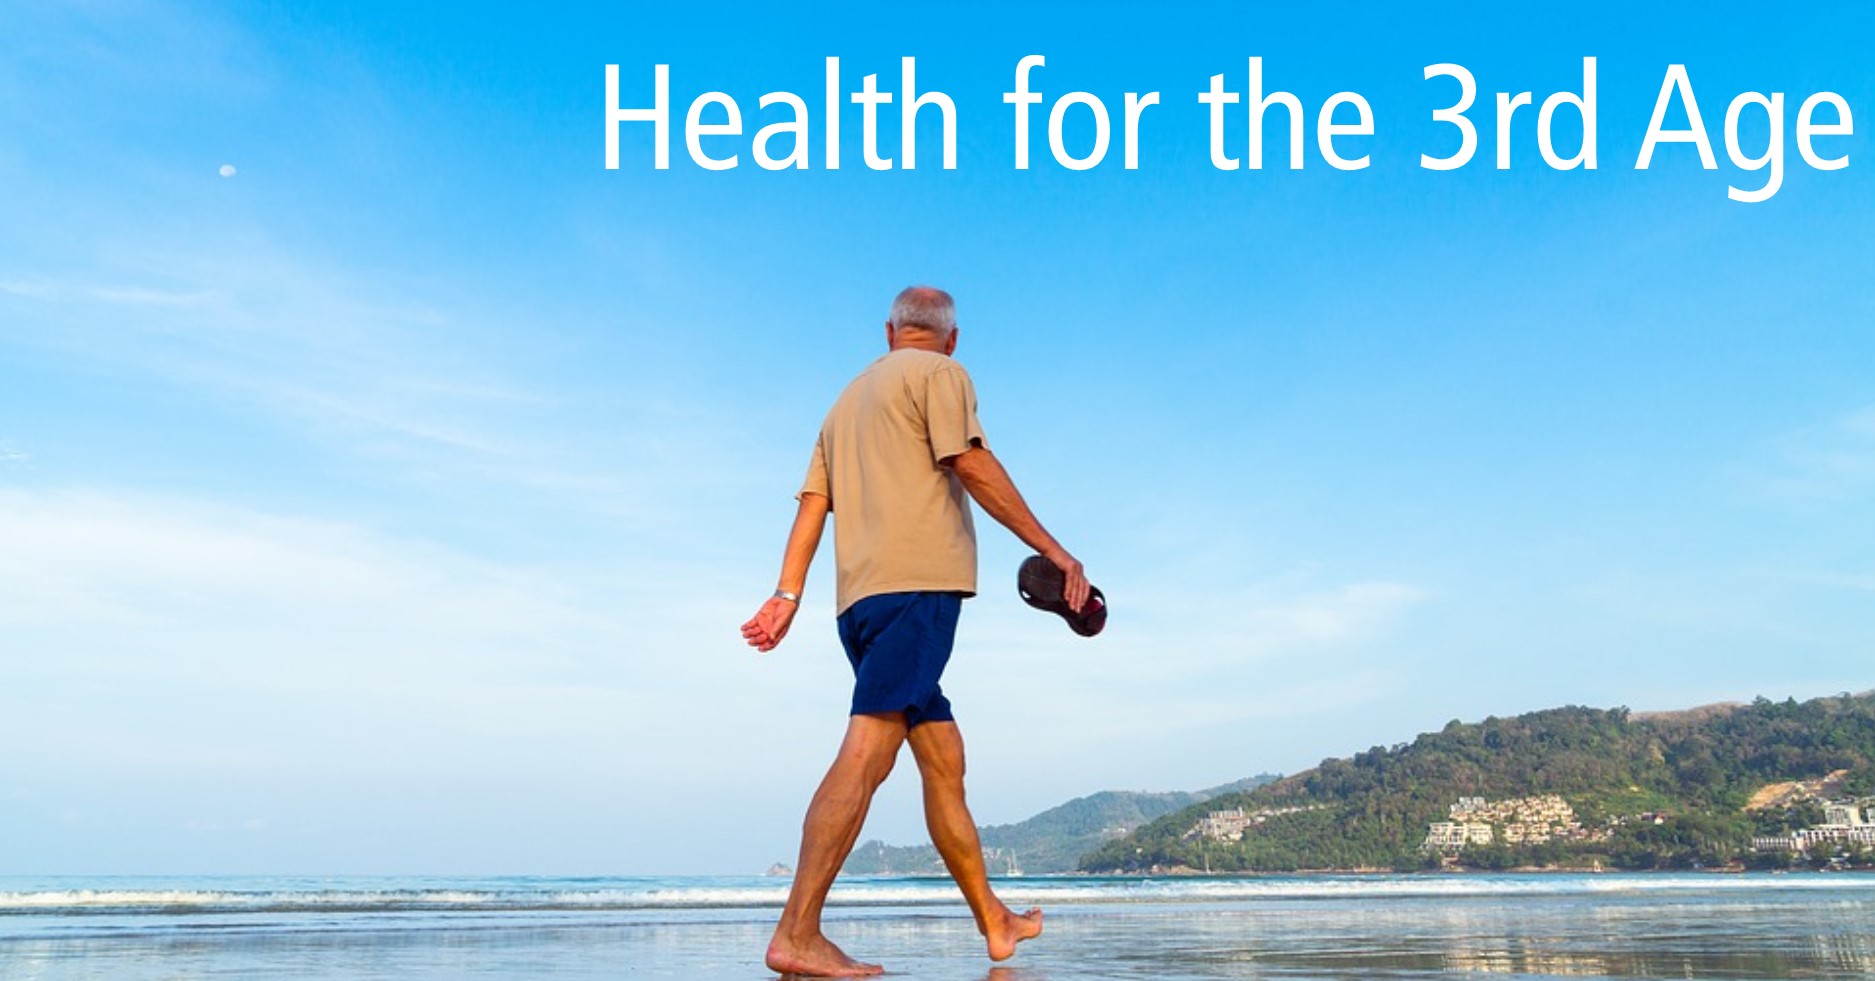 Photo of an older person walking on the beach, with text that says "Health for the 3rd age"